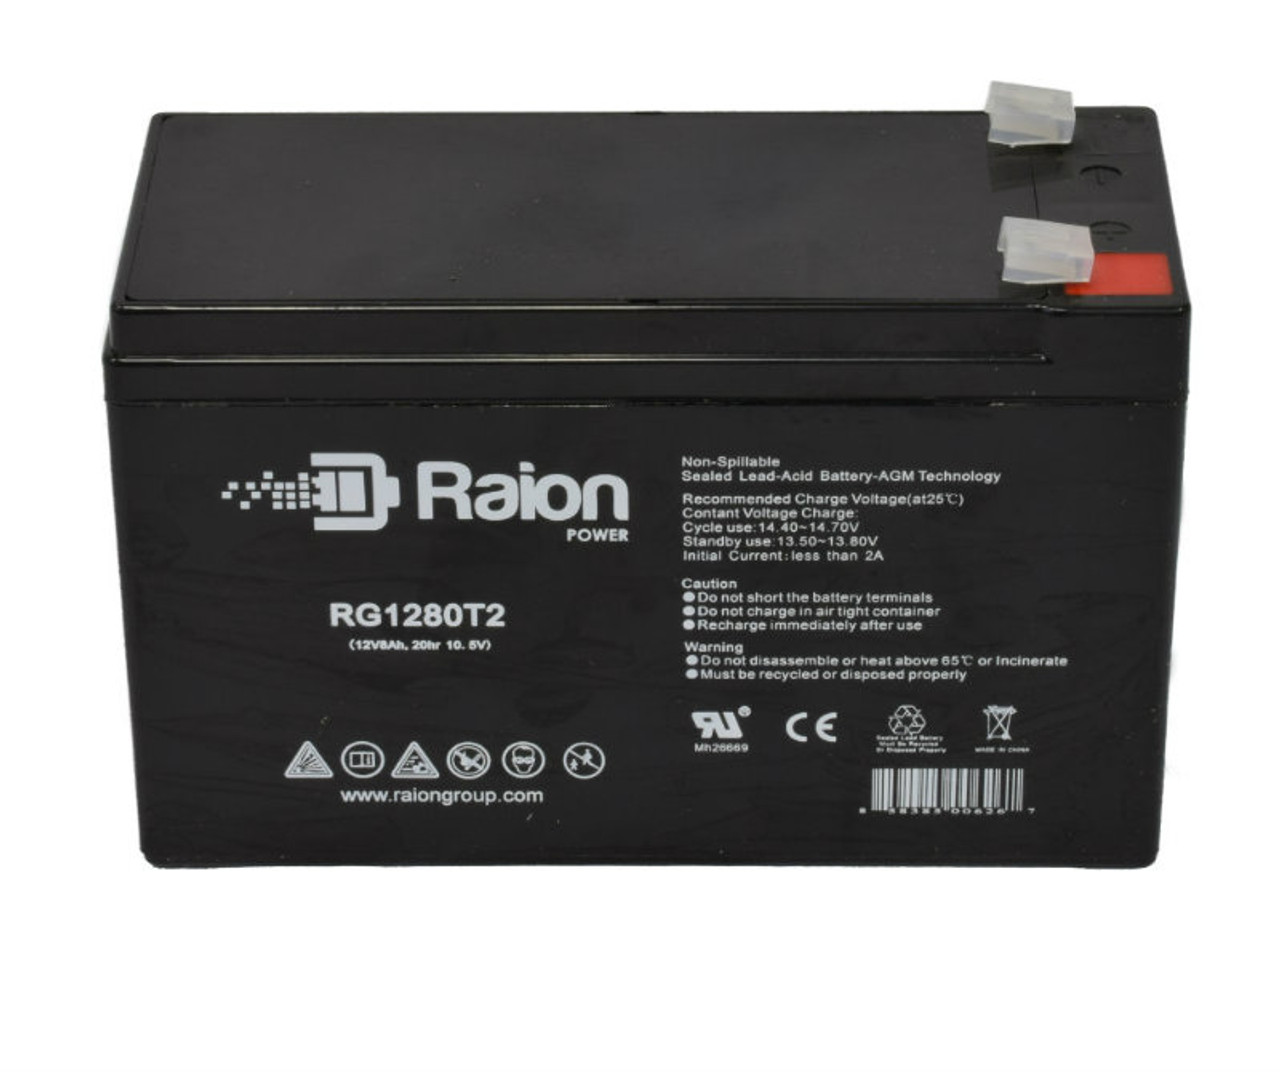 Raion Power Replacement 12V 8Ah Battery for SAM SP-4 Tennis Ball Machine - 1 Pack